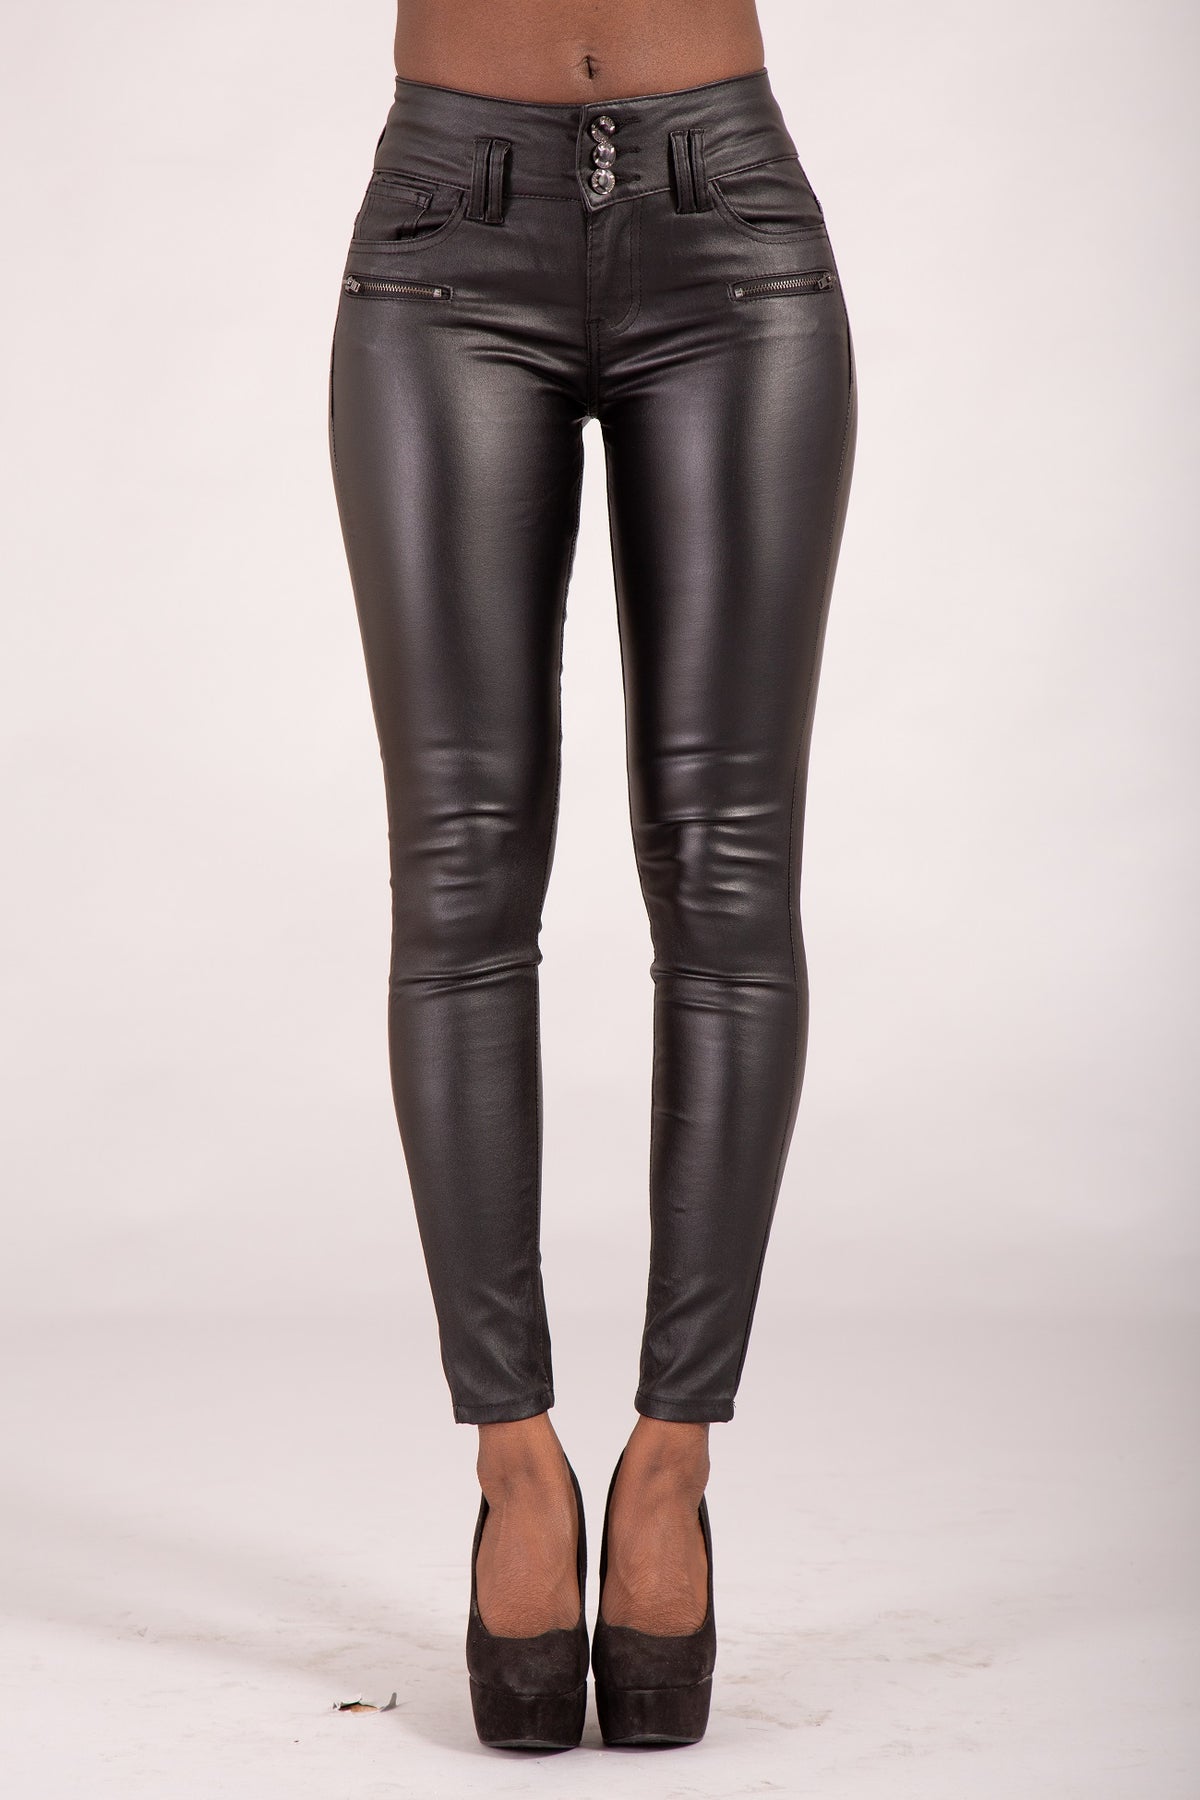 Broadway NYC Black Leather look Trousers & Womens Black Leather look  Trousers | Wearitboutique